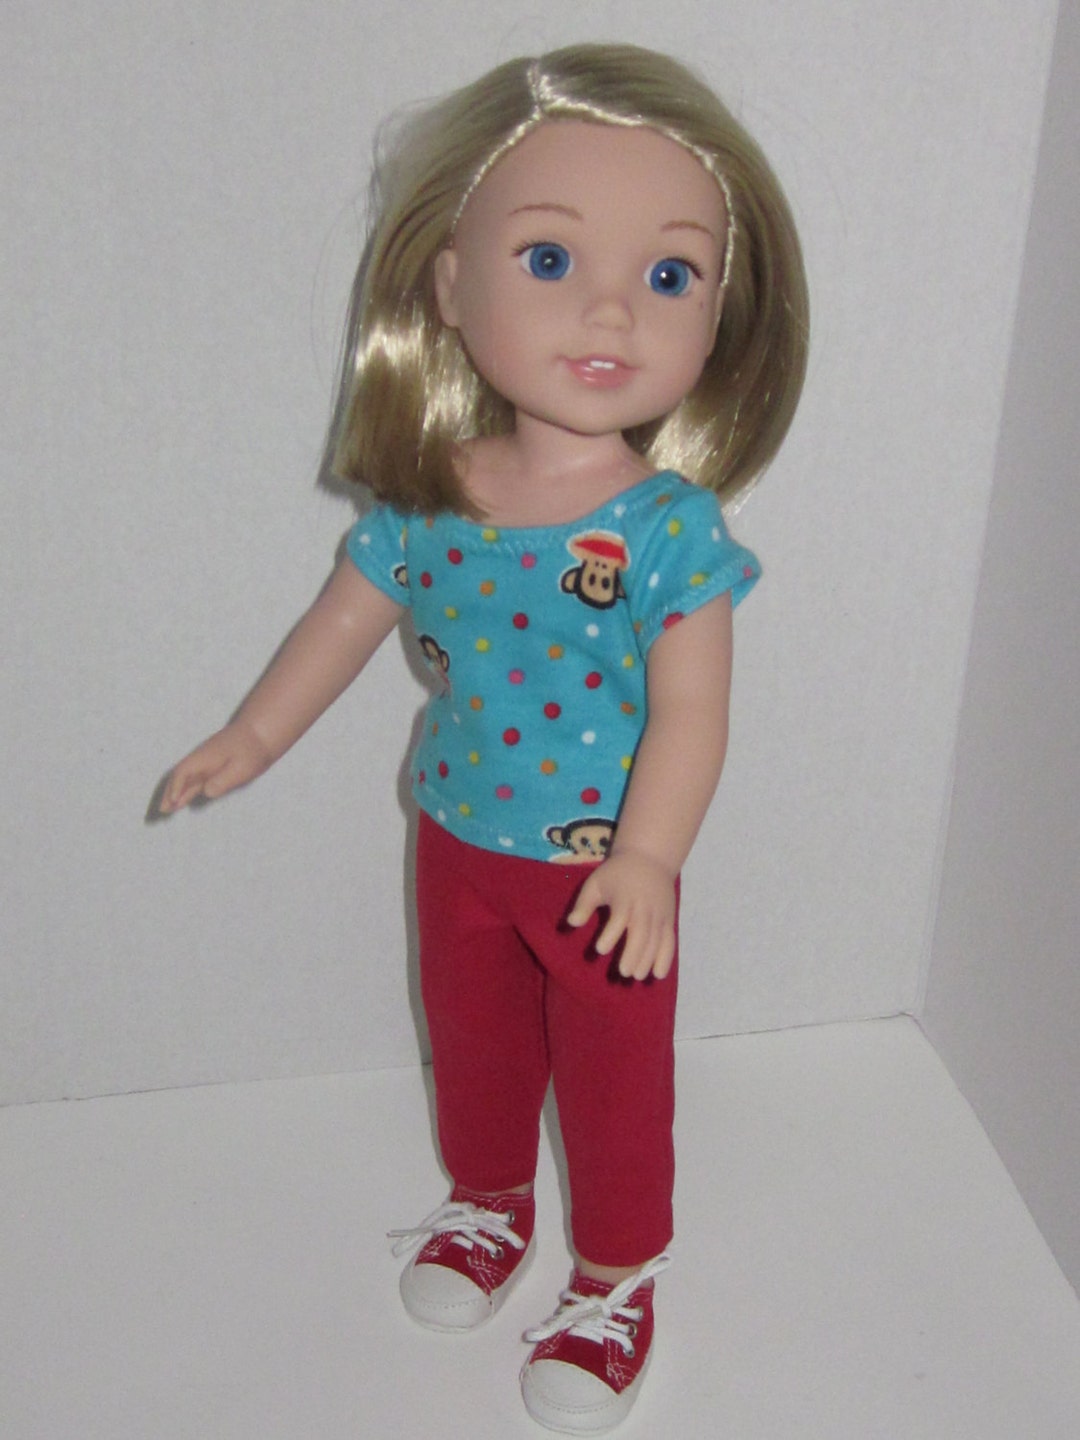 14.5 Inch Doll Clothes Monkey T-shirt Red Capris Fits Dolls - Etsy